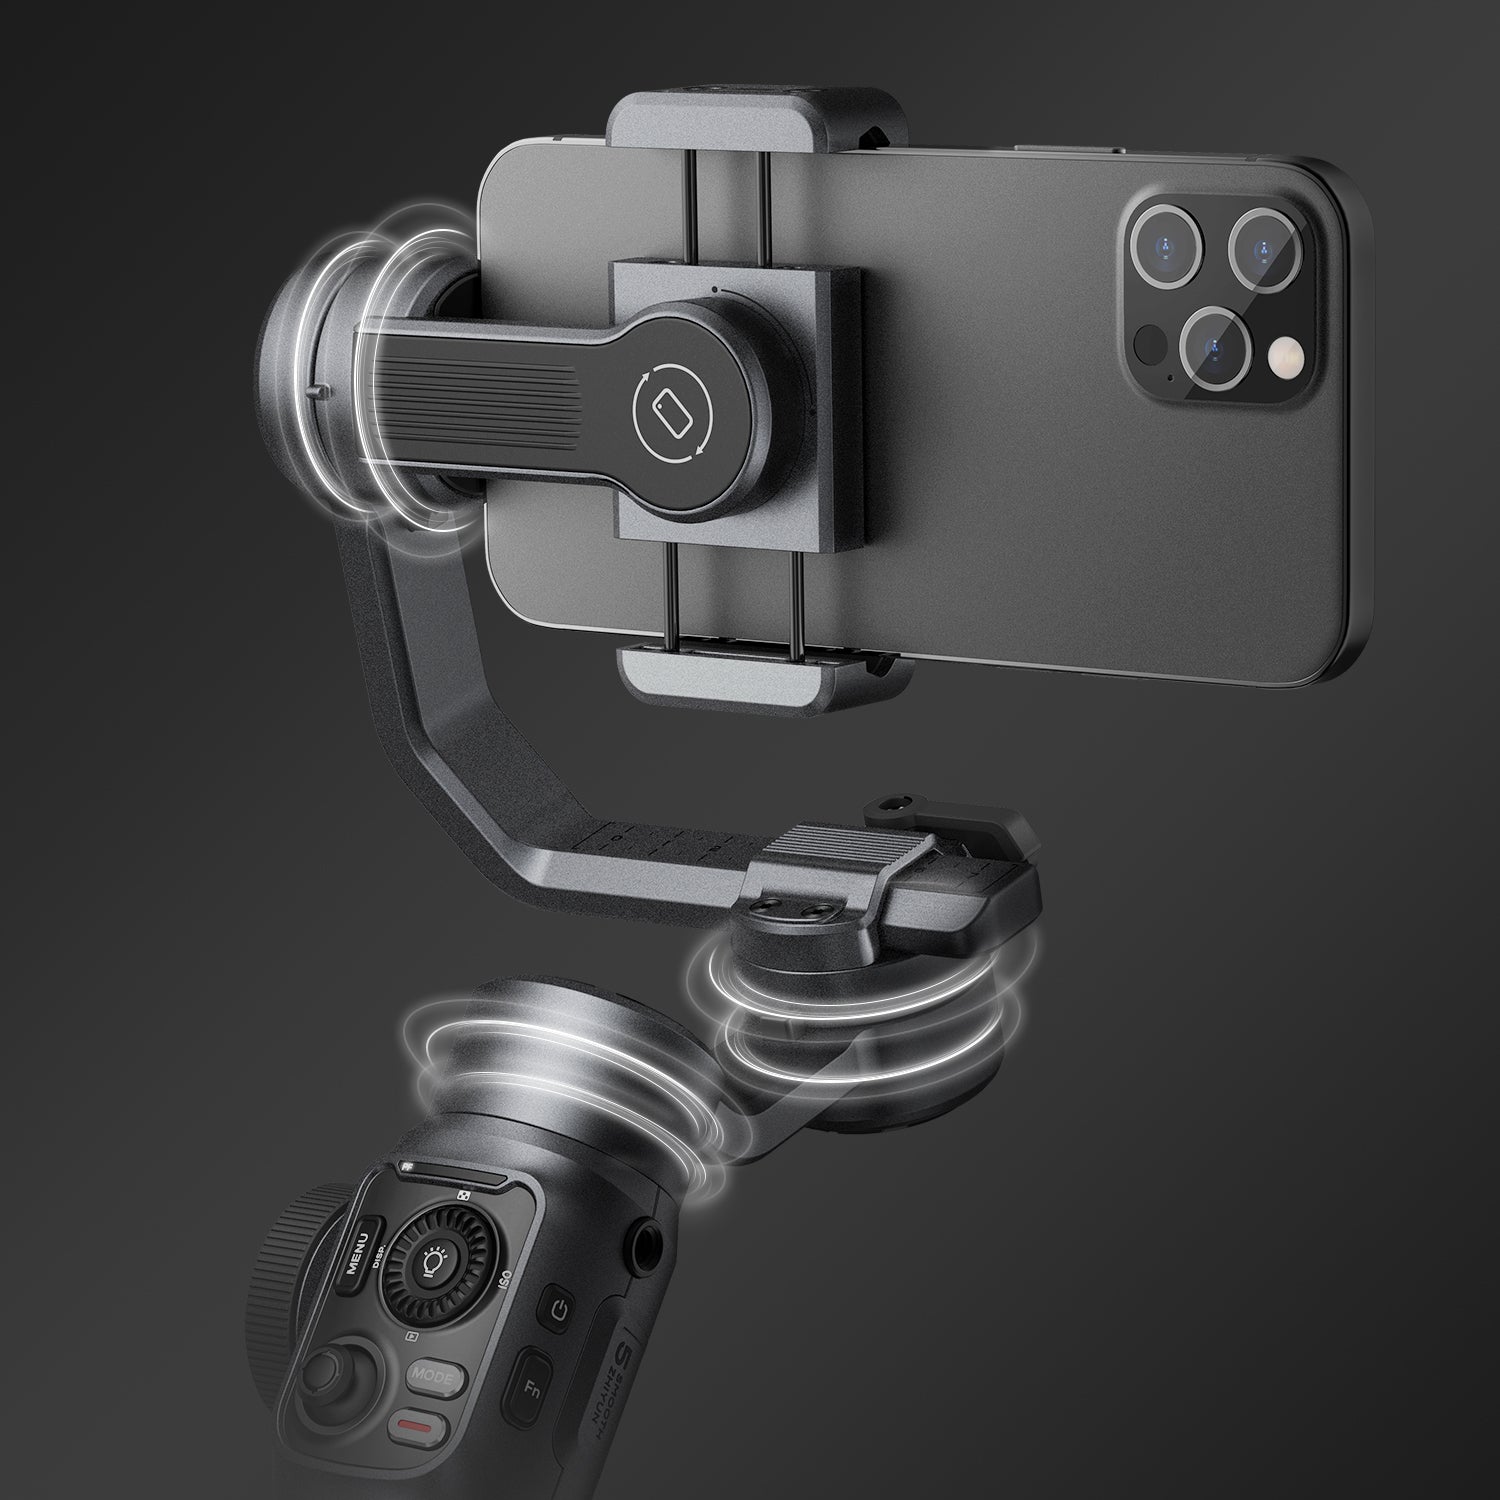 Zhiyun-Tech Smooth 5 Standard Smartphone Gimbal Stabilizer with 3 Axis